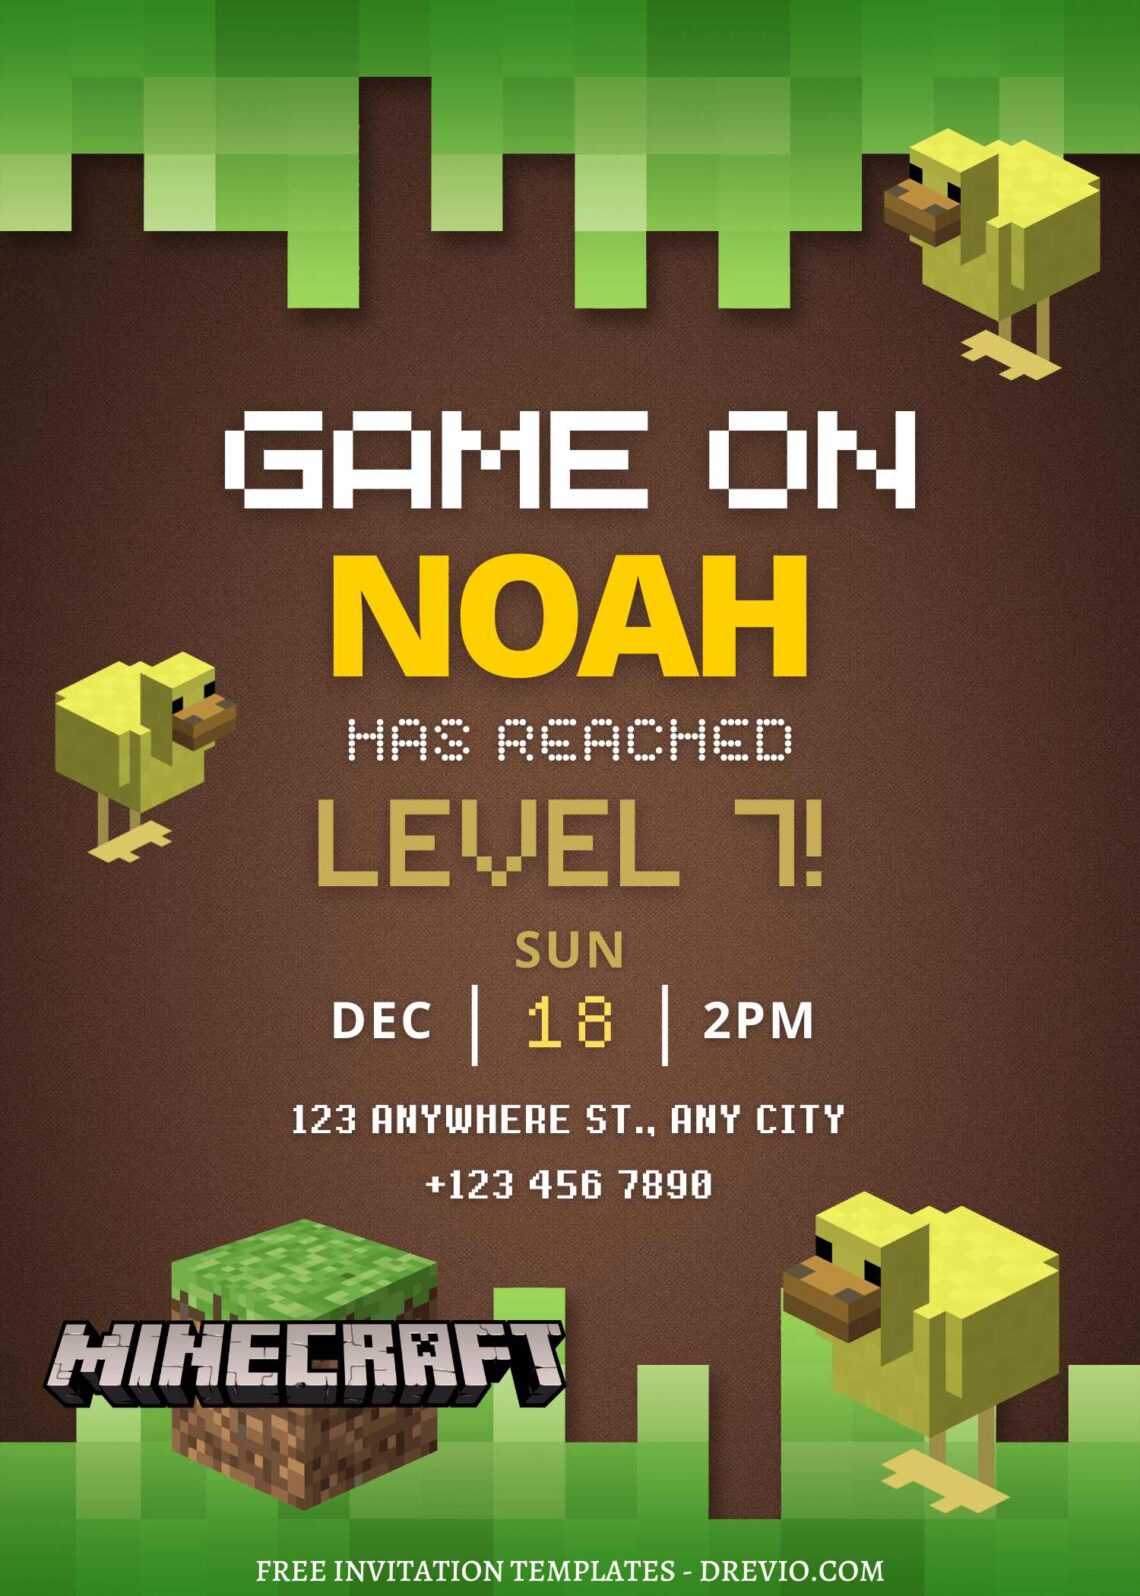 FREE EDITABLE - 11+ Awesome Minecraft Canva Birthday Invitation Templates with cute wording